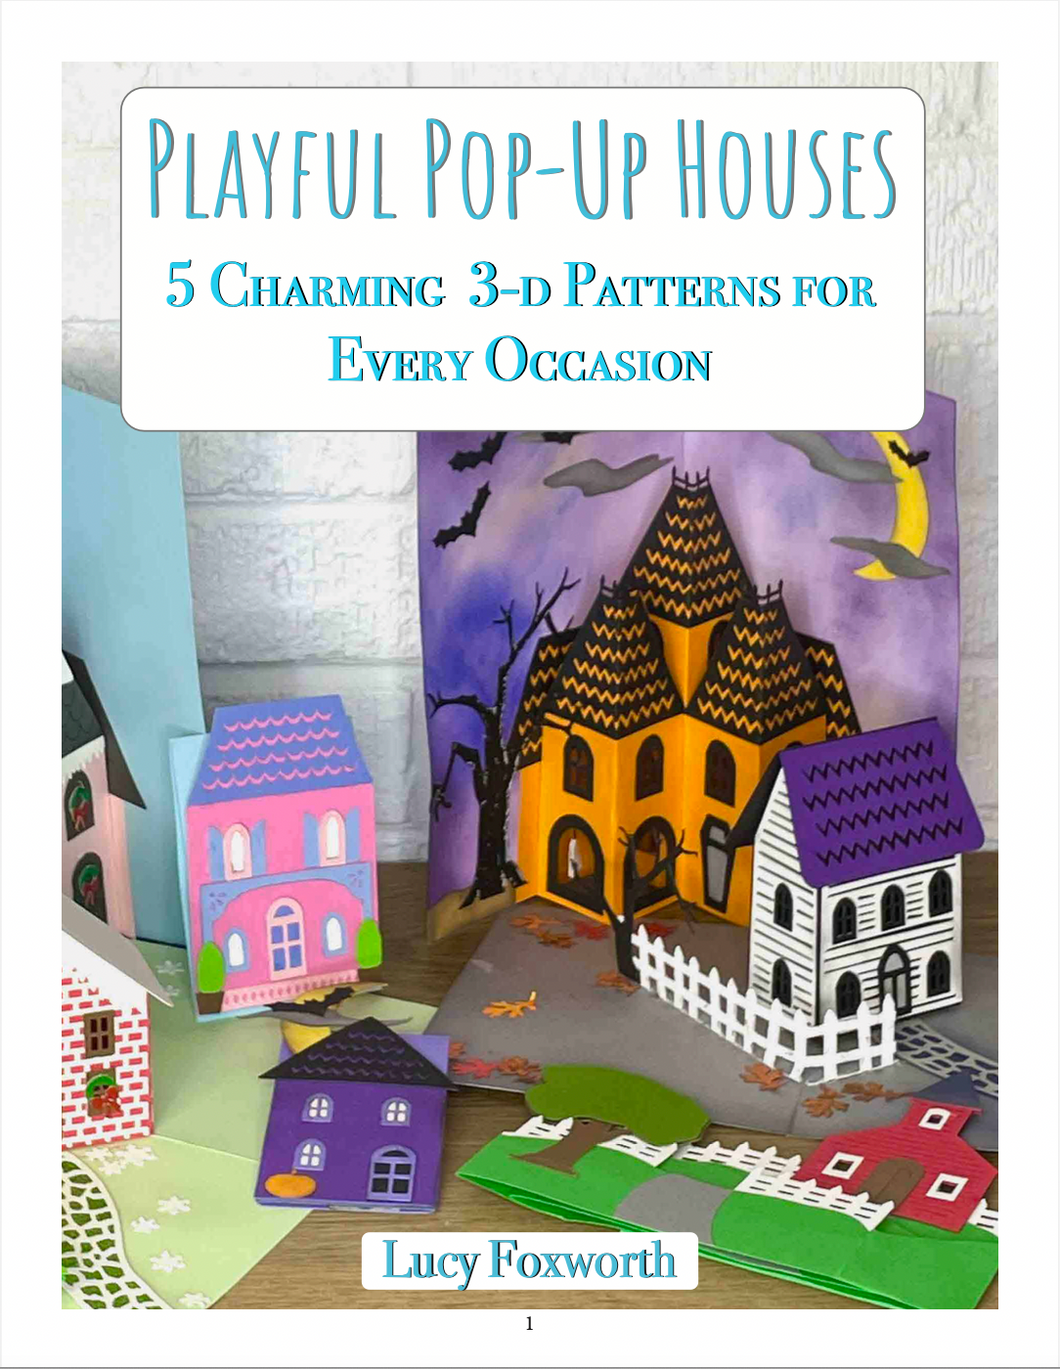 Playful Pop-Up Houses - 5 Charming 3-D Patterns for Every Occasion